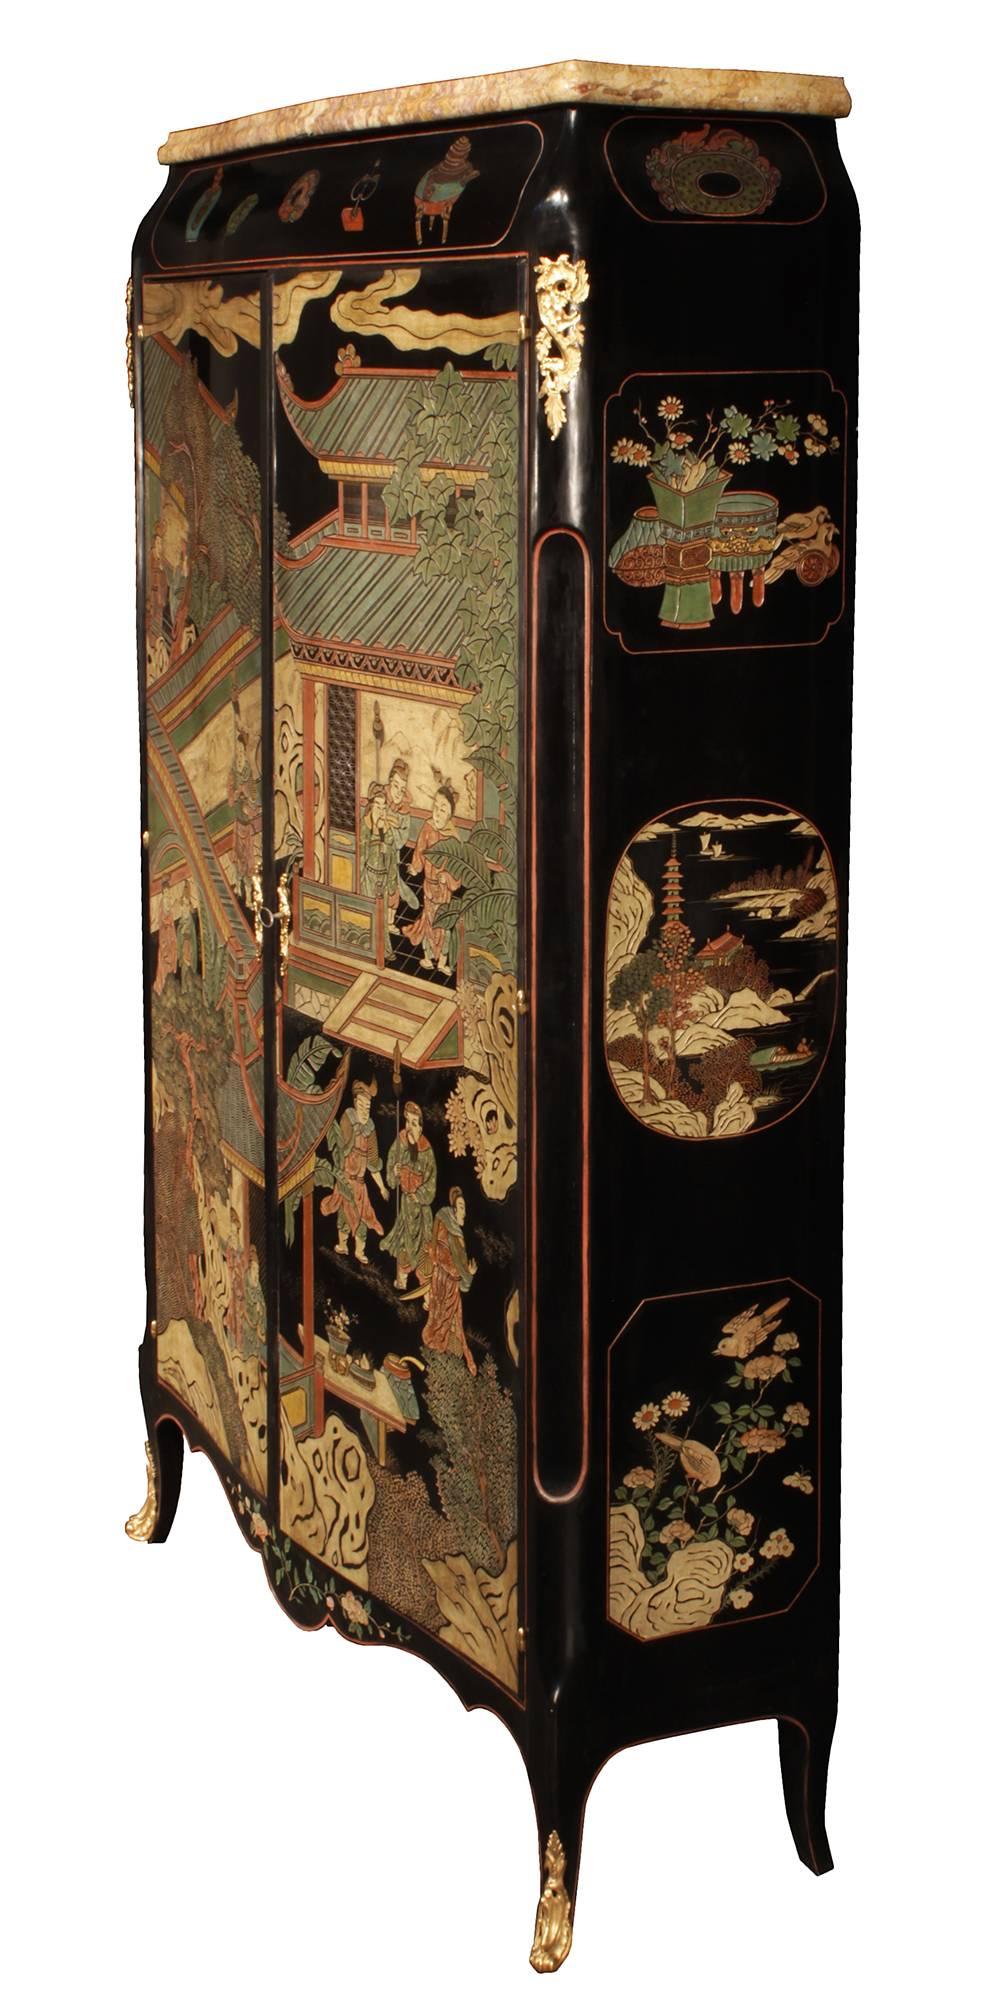 A stunning 19th century French Louis XV st. Coromandel and ormolu armoire. The armoire is raised by four elegant cabriole legs with richly chased pierced ormolu sabots and a unique inlaid red filet leading along the scalloped frieze that is centered